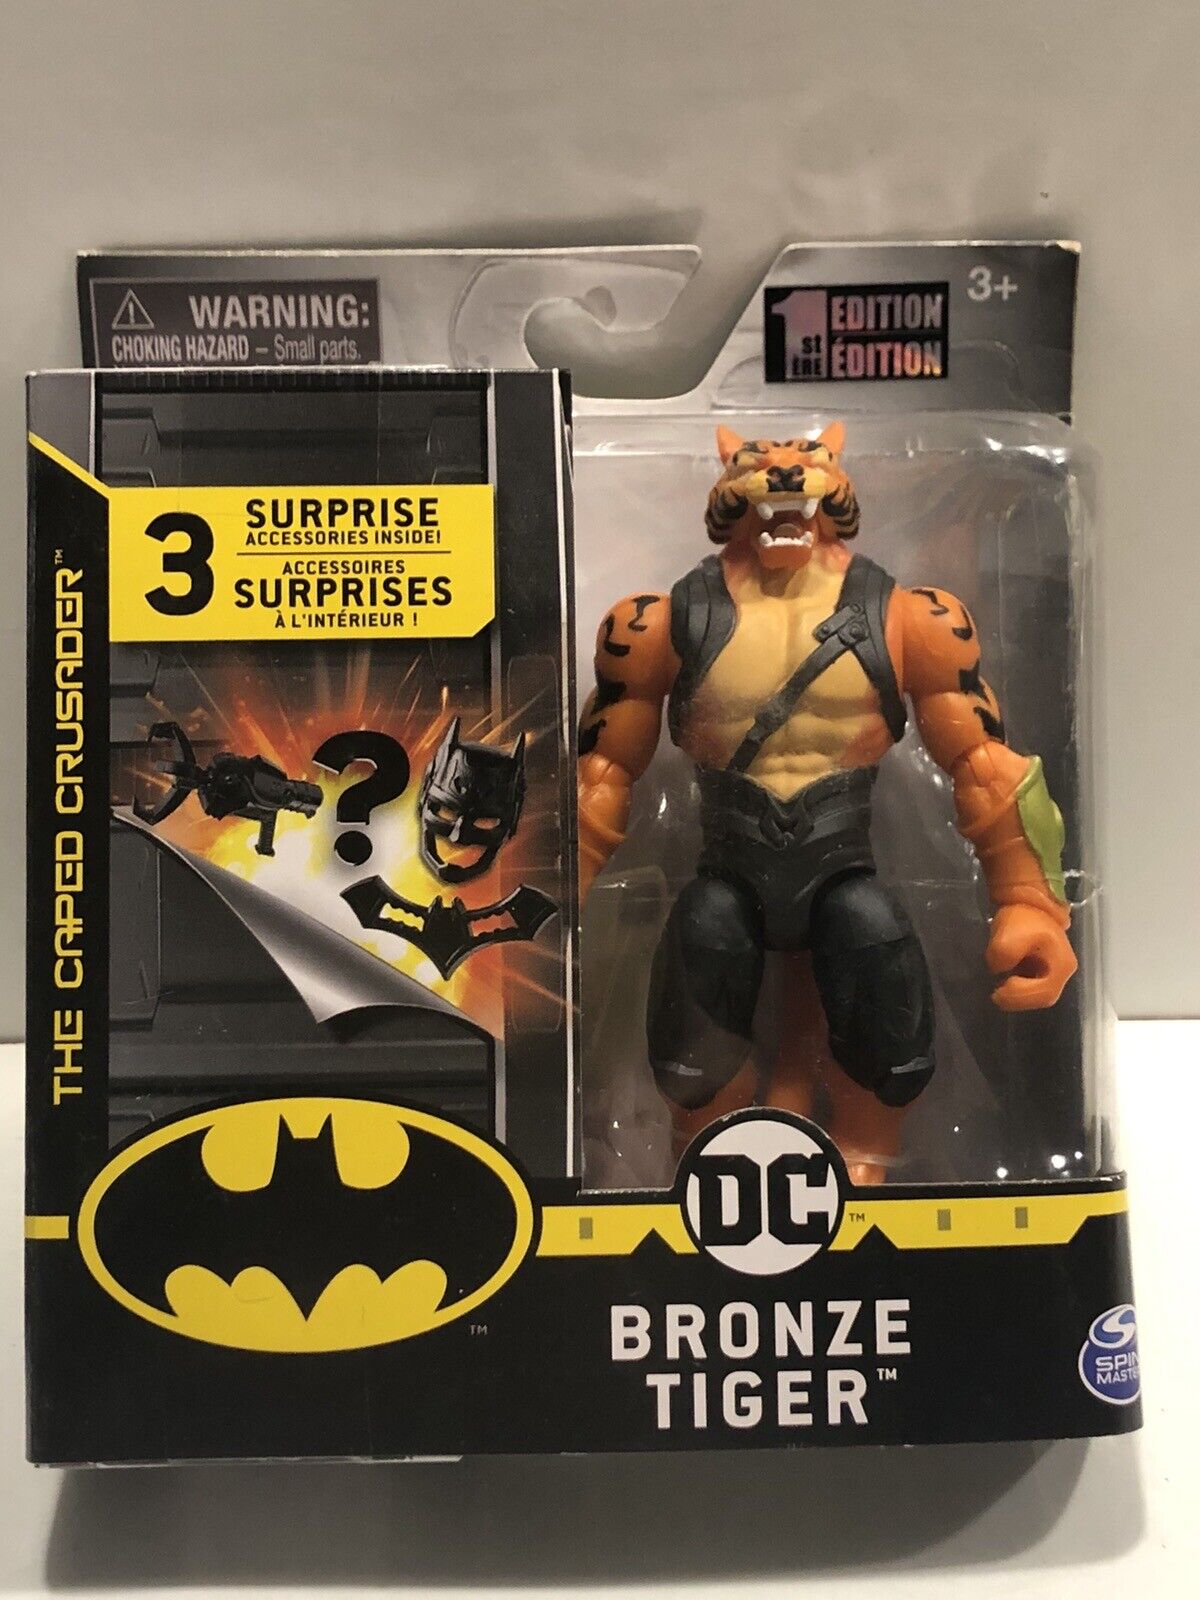 DC The Caped Crusader Bronze Tiger 4" Action Figure with 3 Mystery Accessories